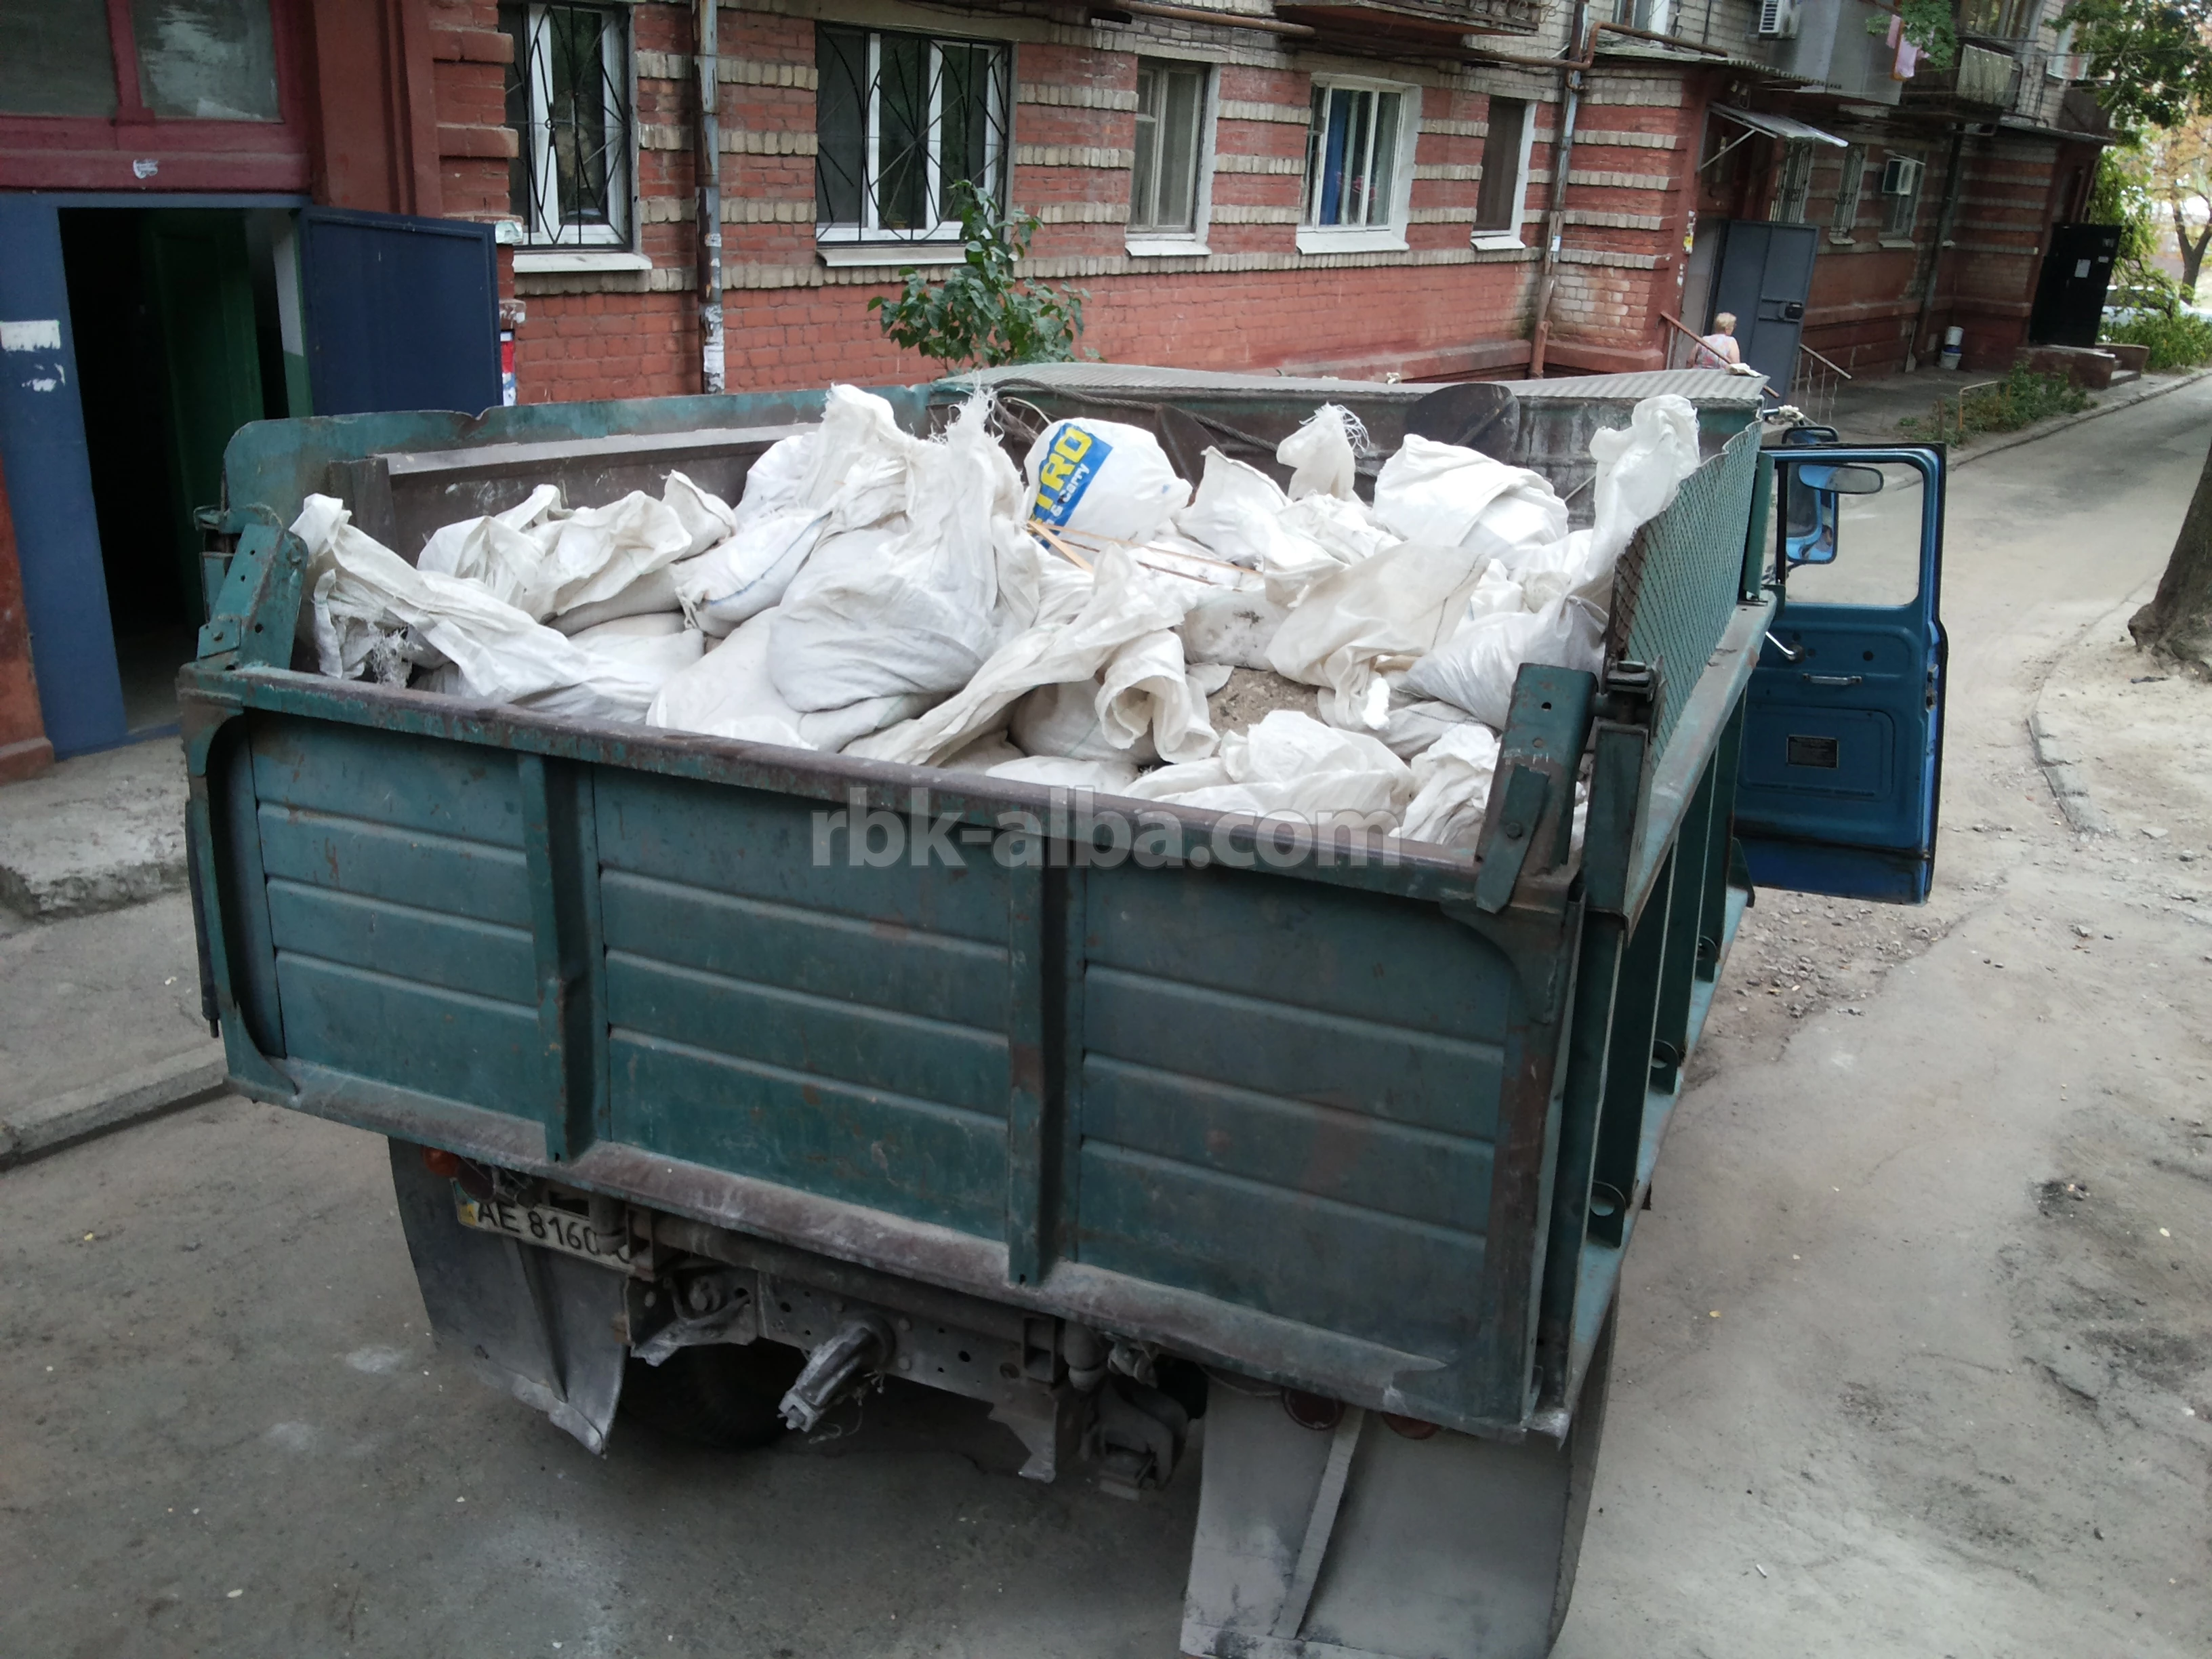 Garbage removal by dump trucks